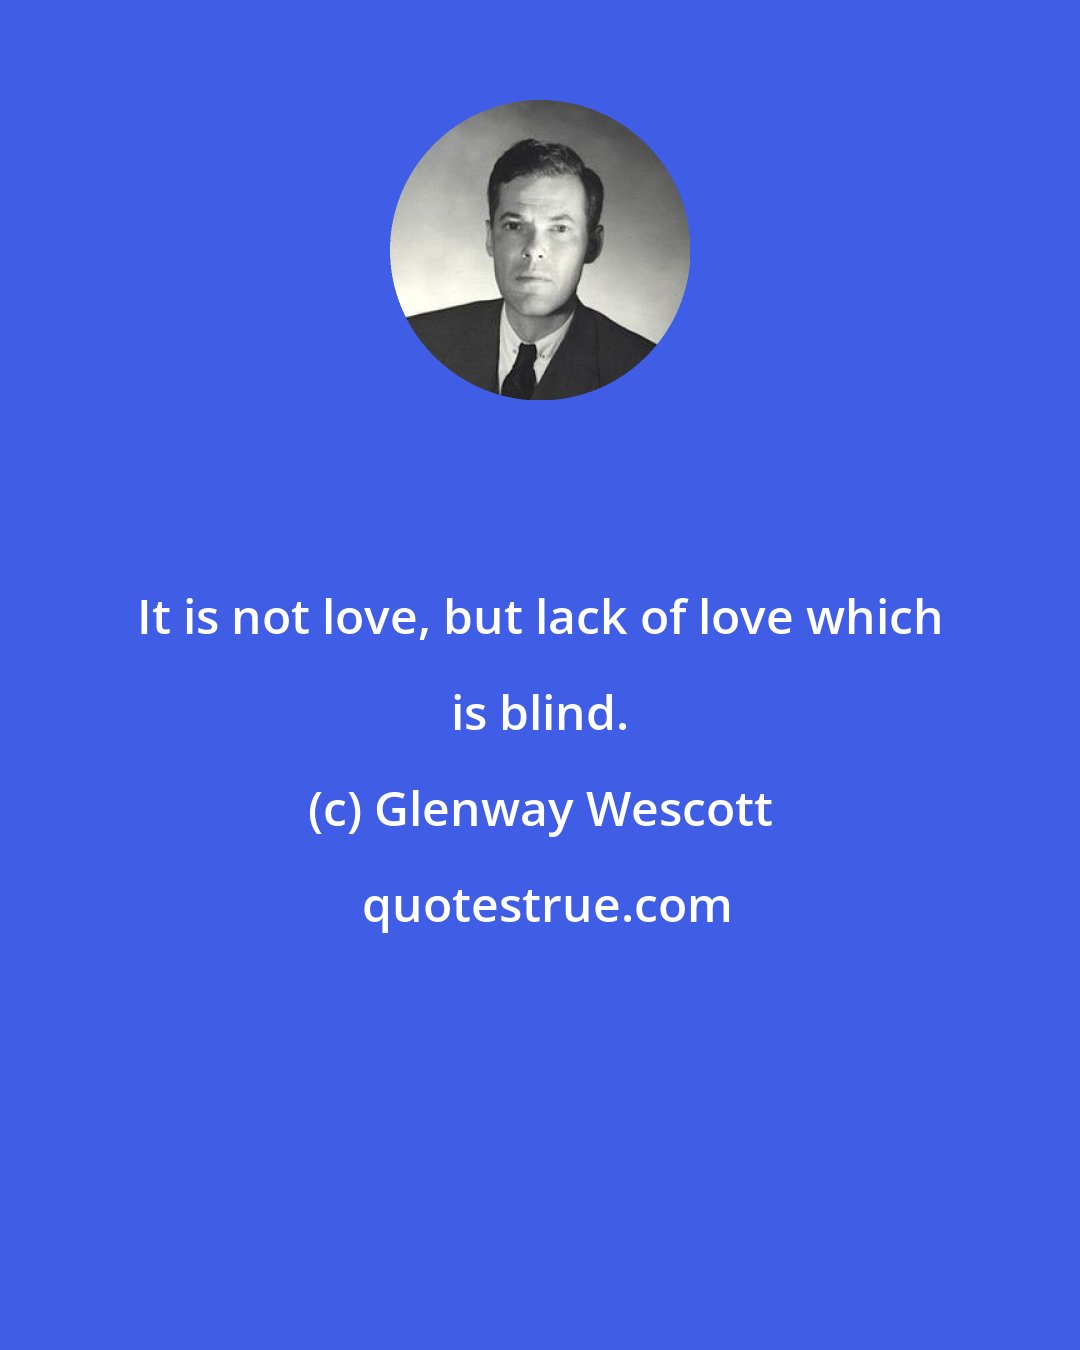 Glenway Wescott: It is not love, but lack of love which is blind.